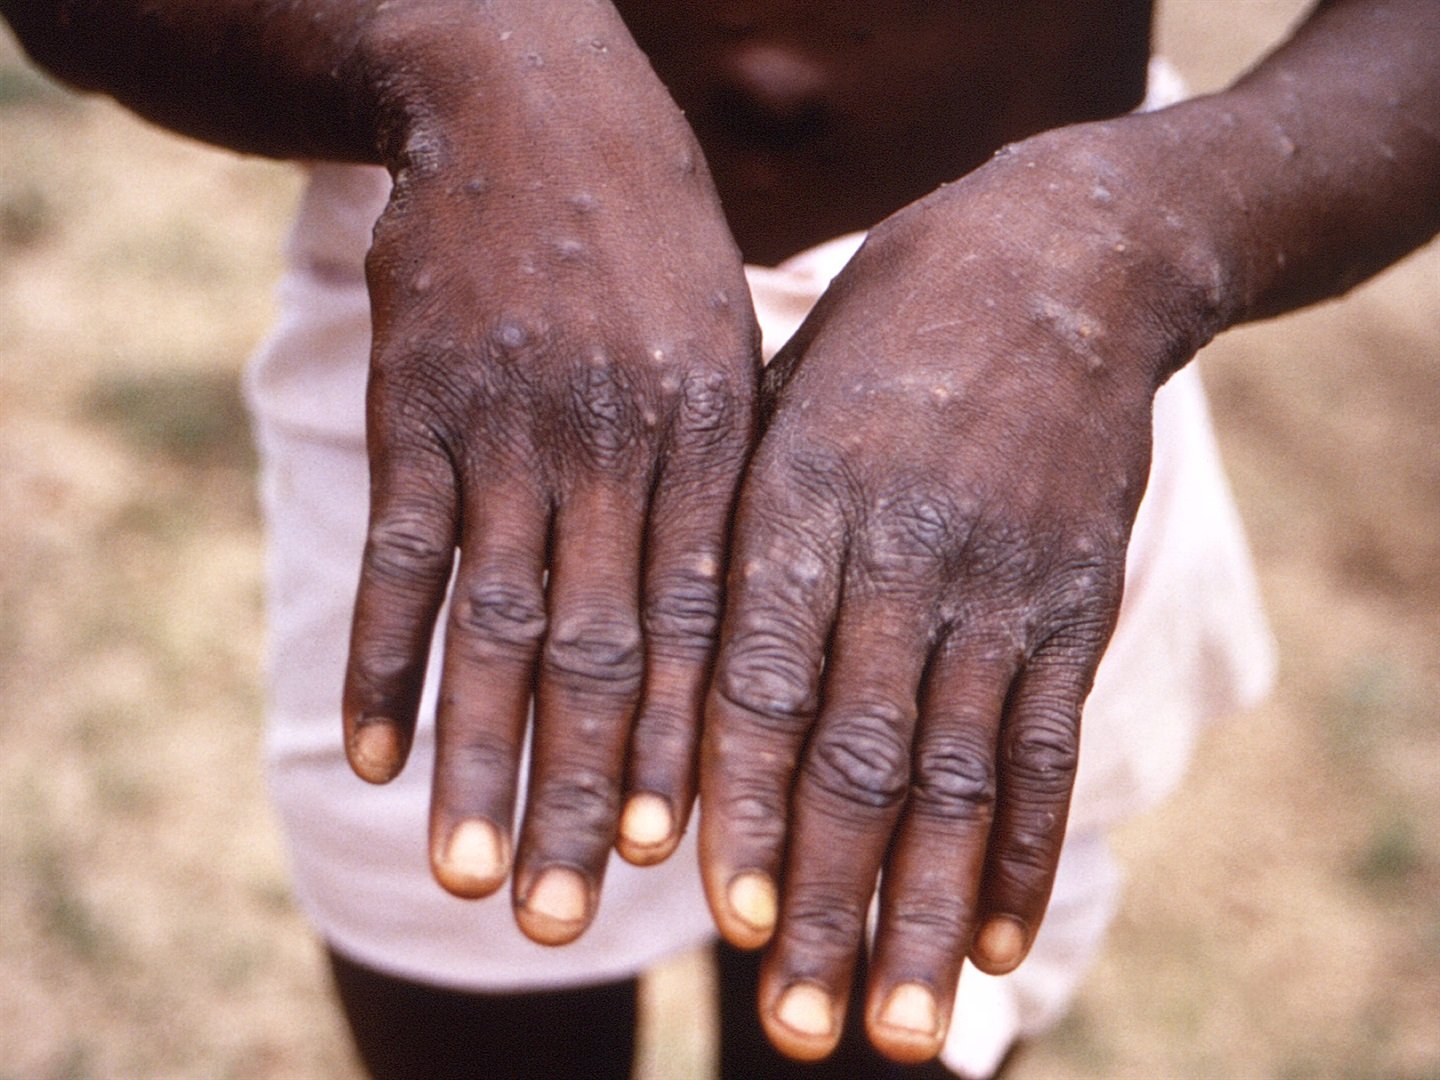 rare-monkeypox-outbreaks-detected-in-north-america-europe-news24